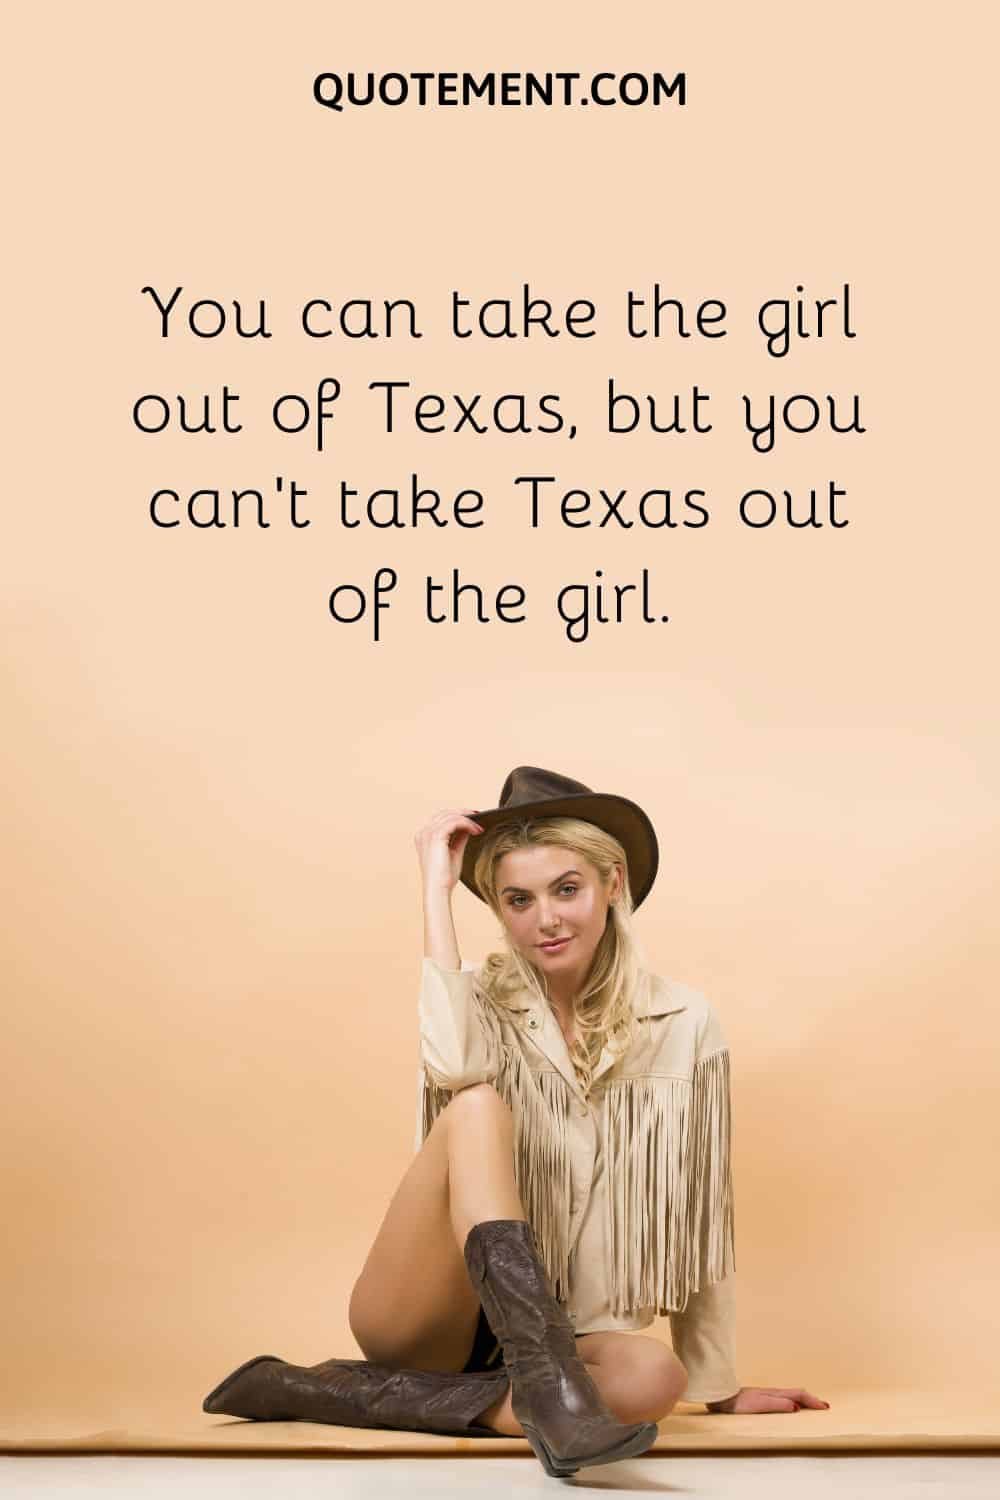 You can take the girl out of Texas, but you can’t take Texas out of the girl.